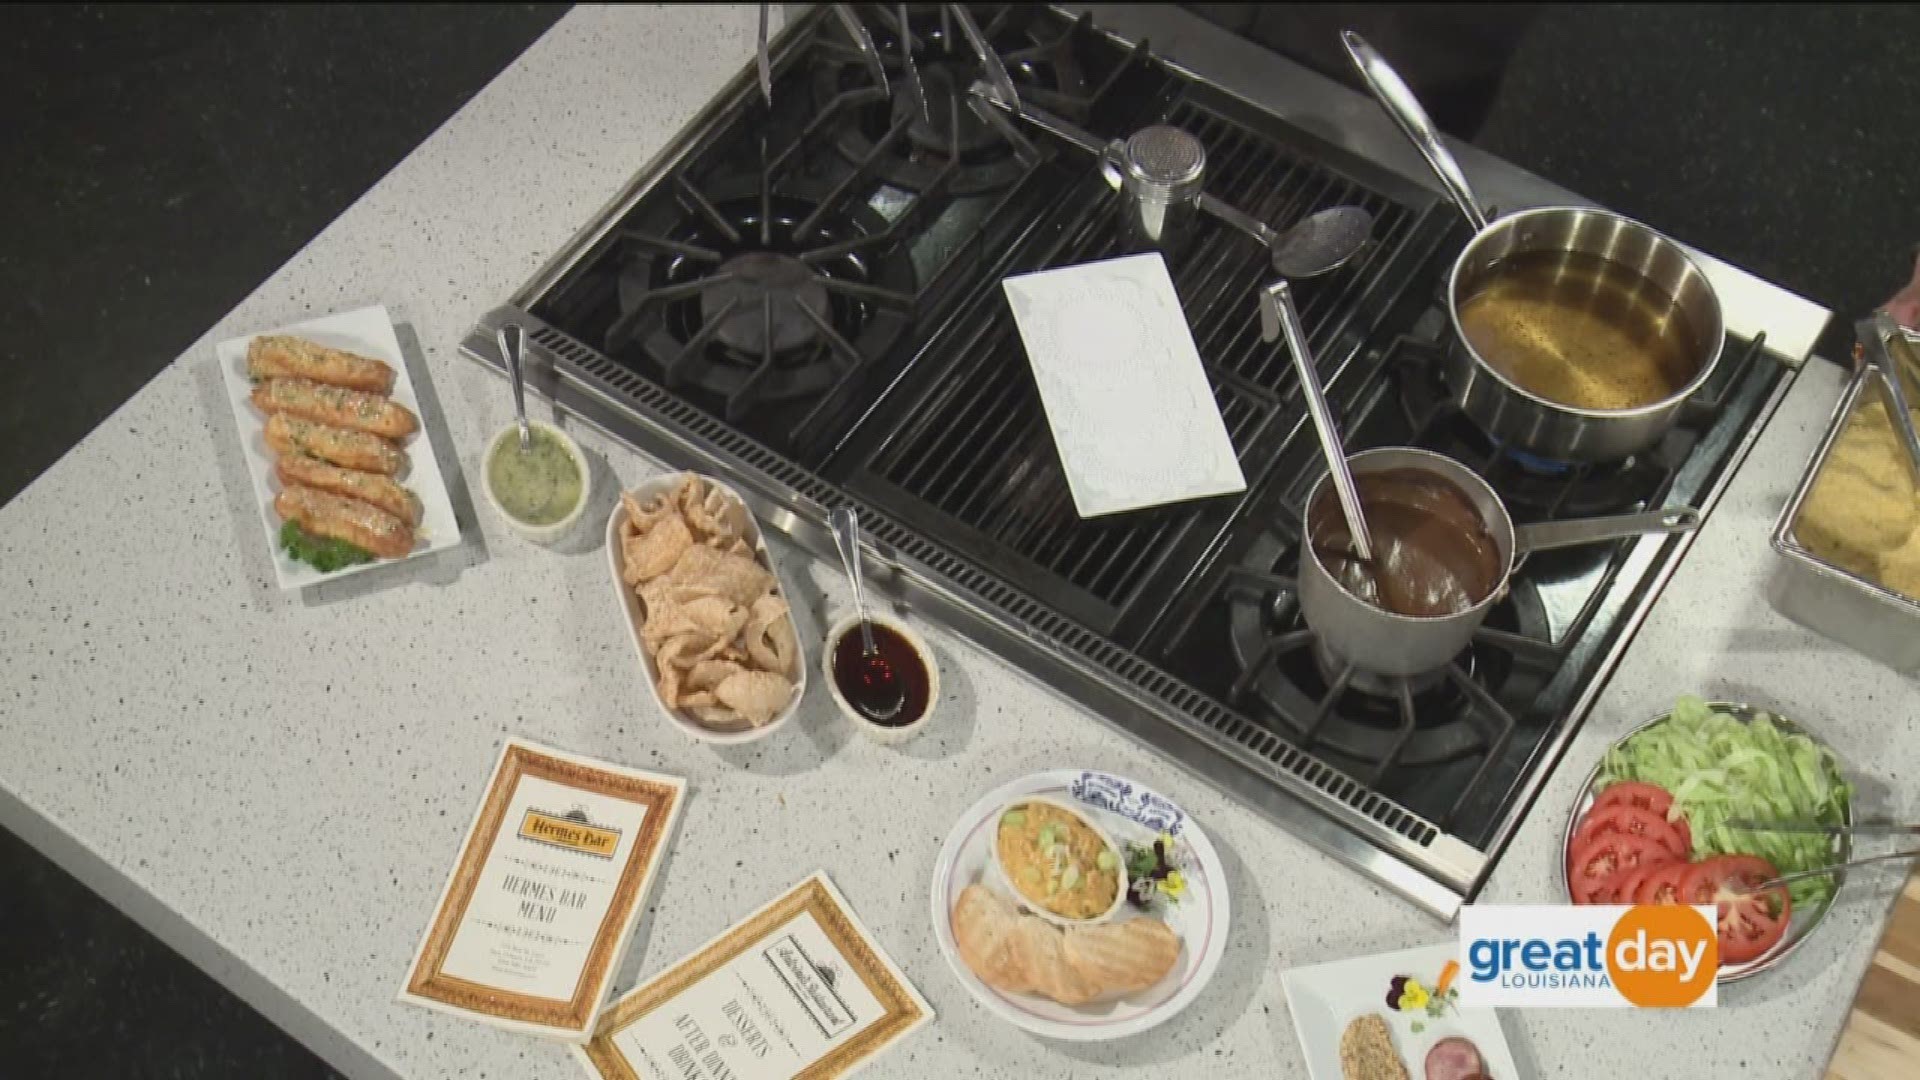 Chef Rich Lee with Antoine's Restaurant joins us to tell us about the Hermes Bar's menu options.